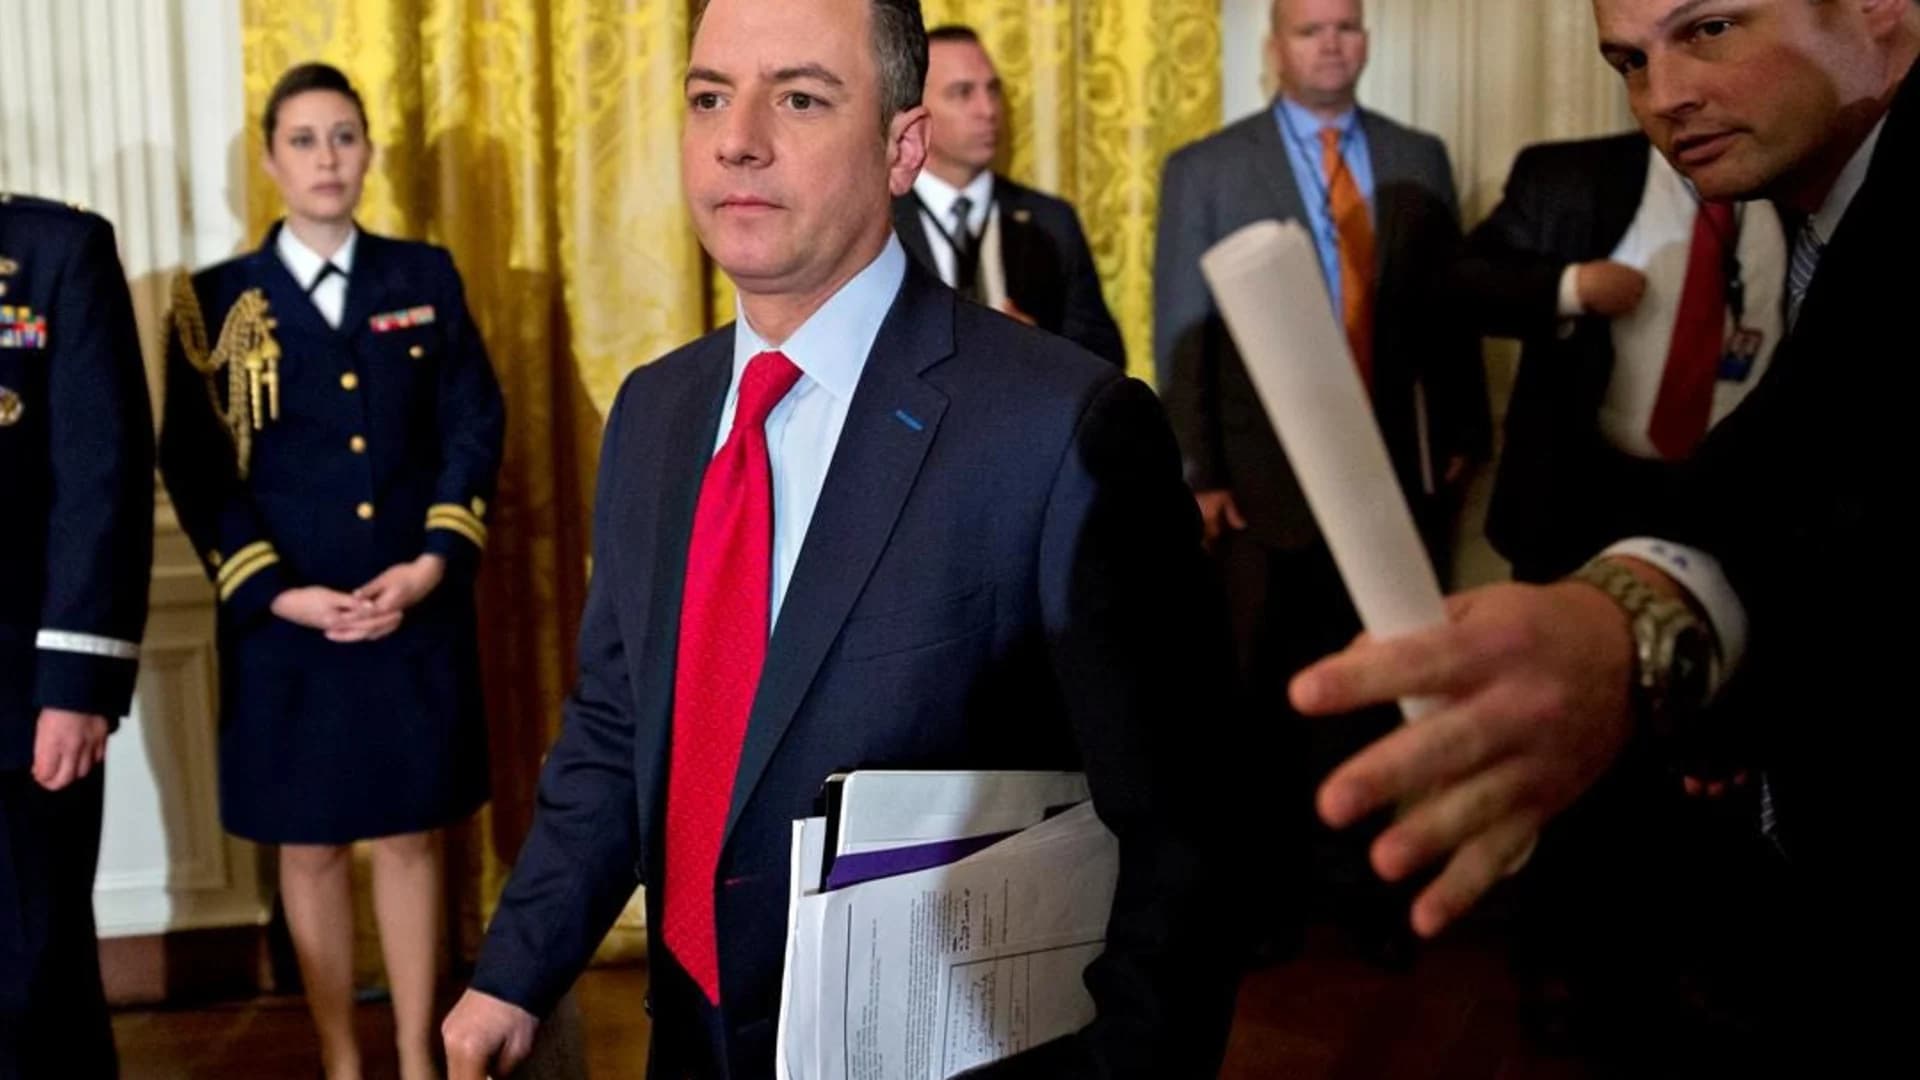 Trump pushes out Priebus, names DHS' Kelly WH chief of staff